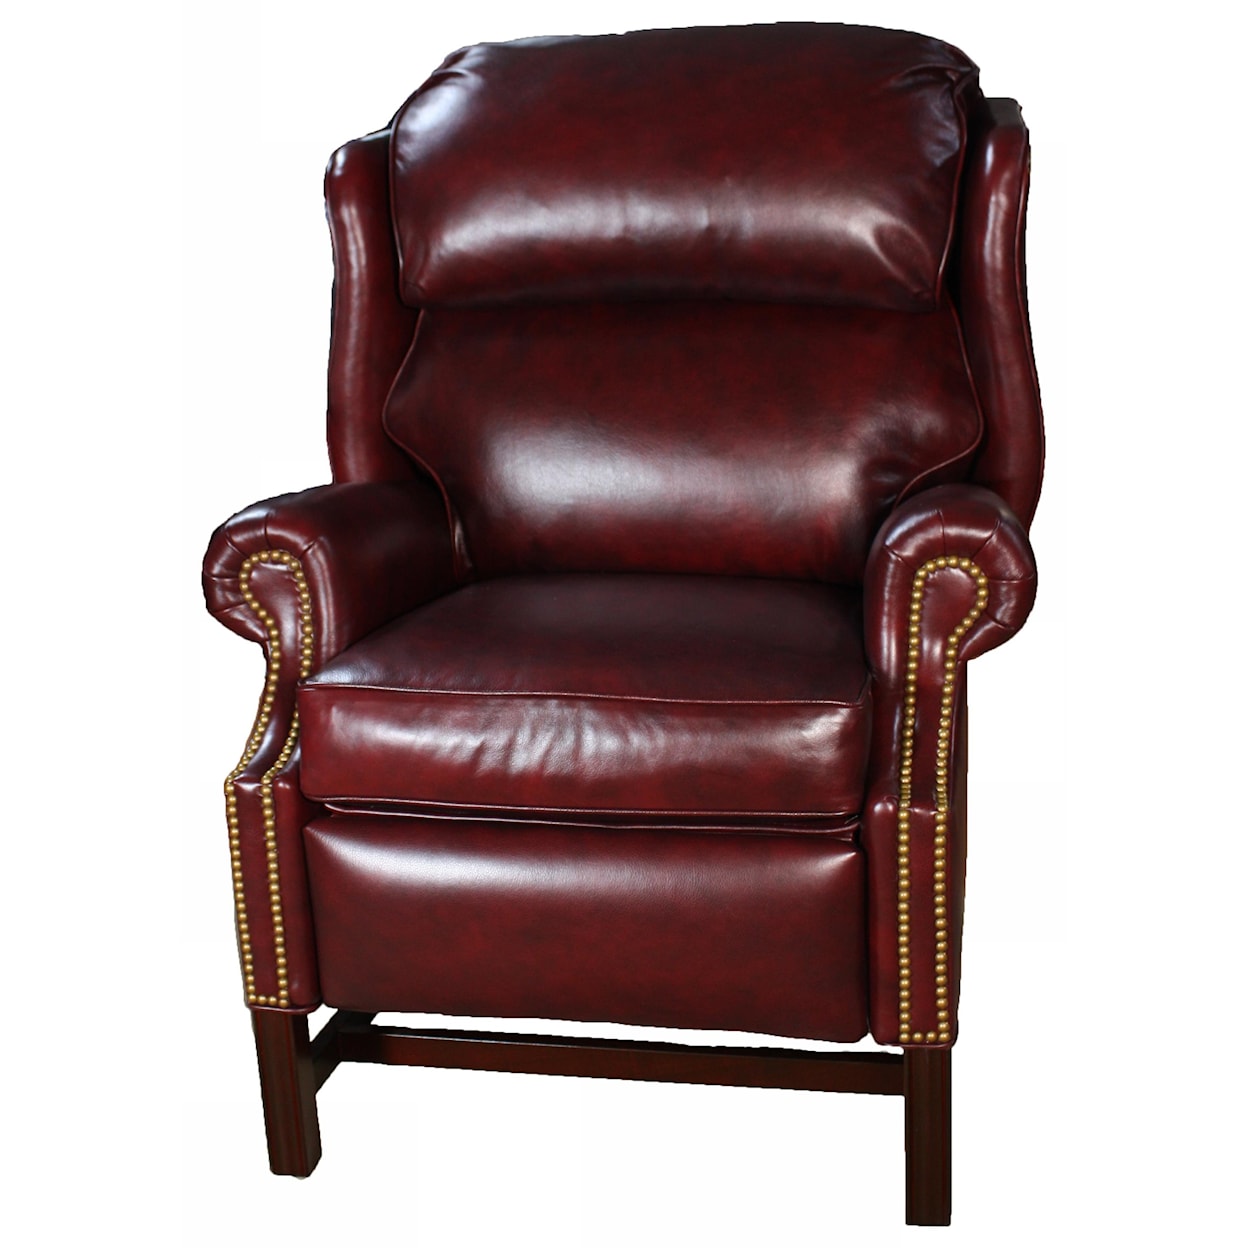 McKinley Leather Odell Chippendale Recliner